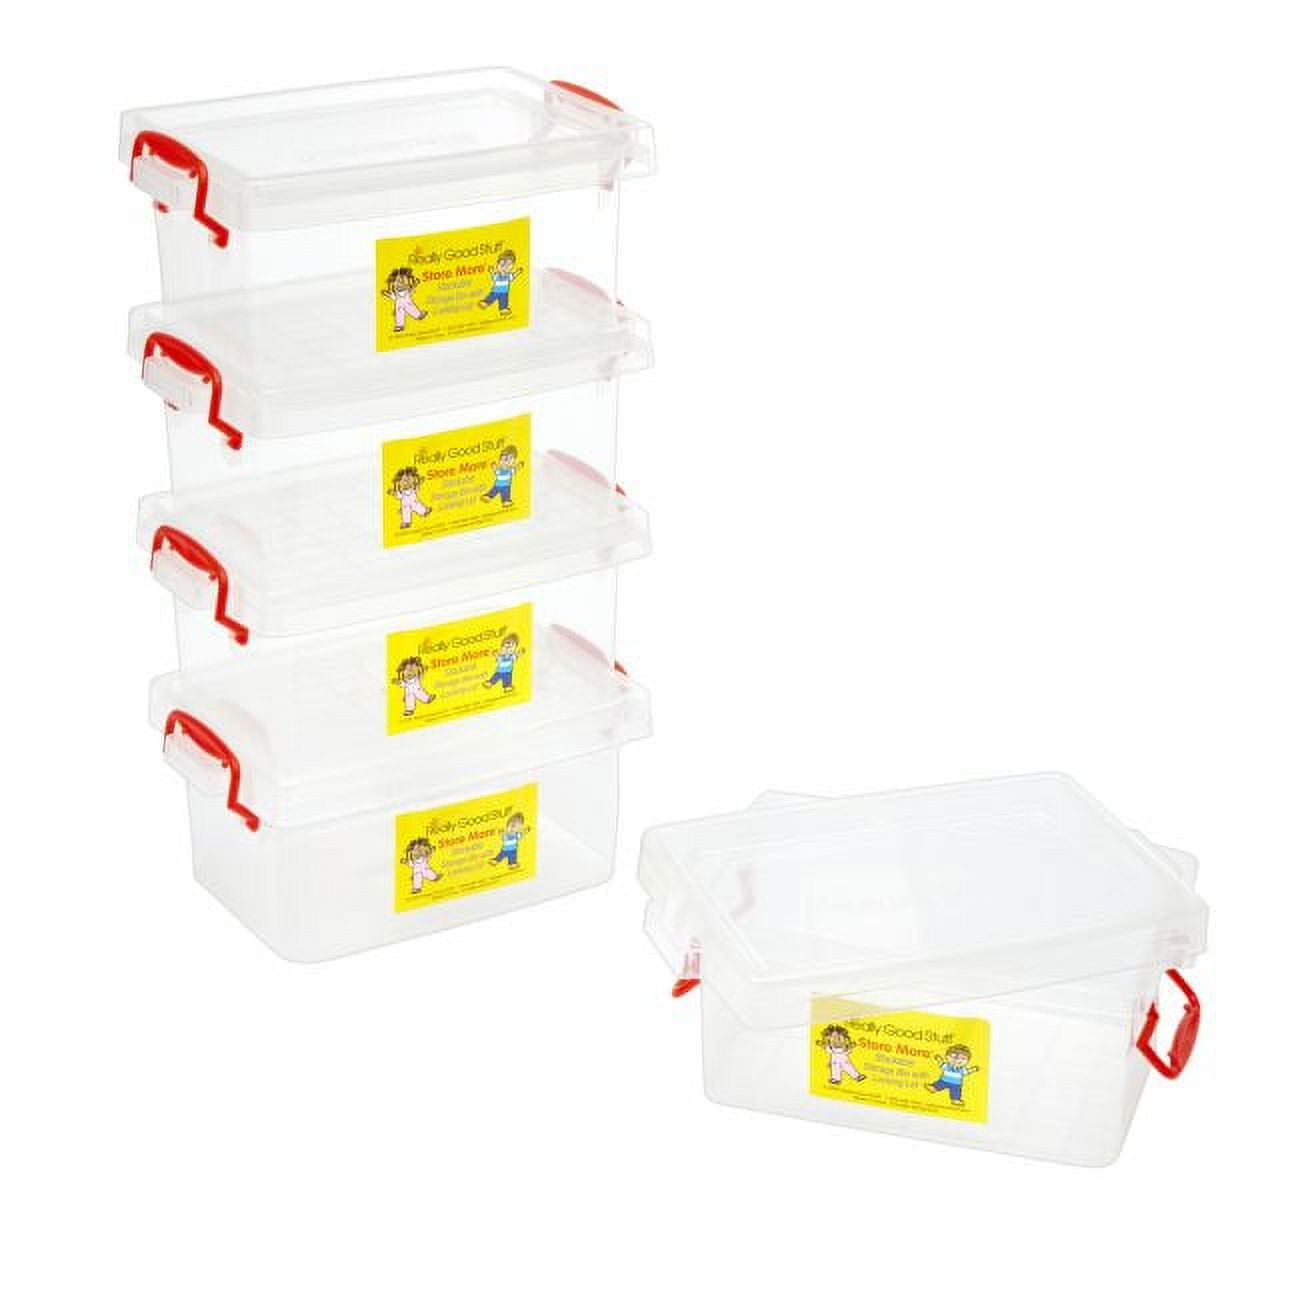 Really Good Stuff Plastic Trays - Tan, 6 Pack by Really Good Stuff